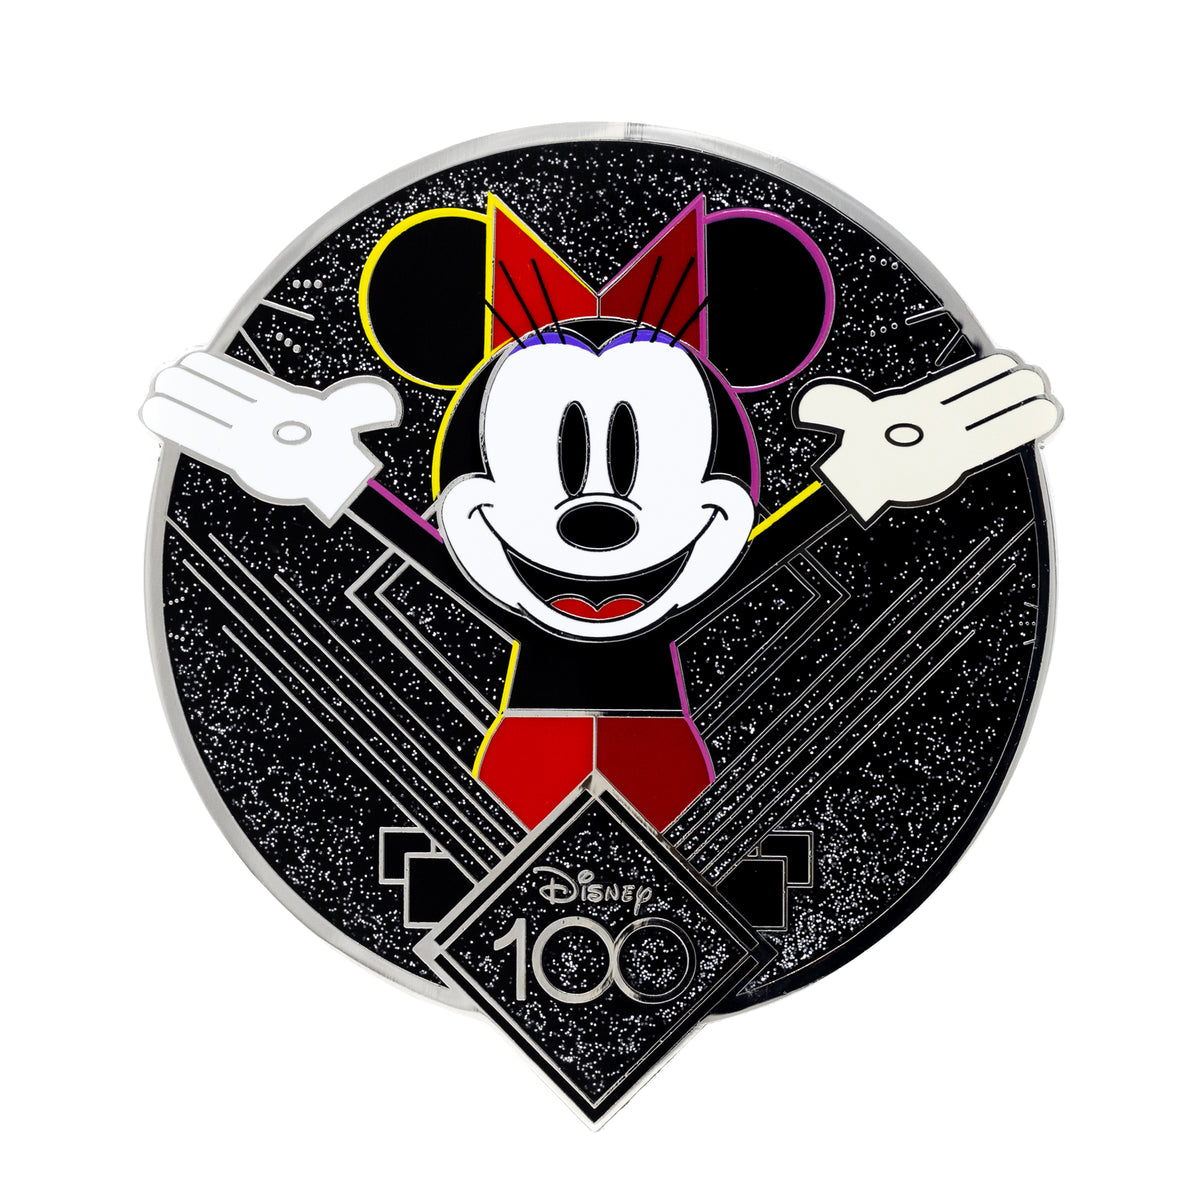 Disney 100 Finale Series - Minnie Mouse Limited Edition 300